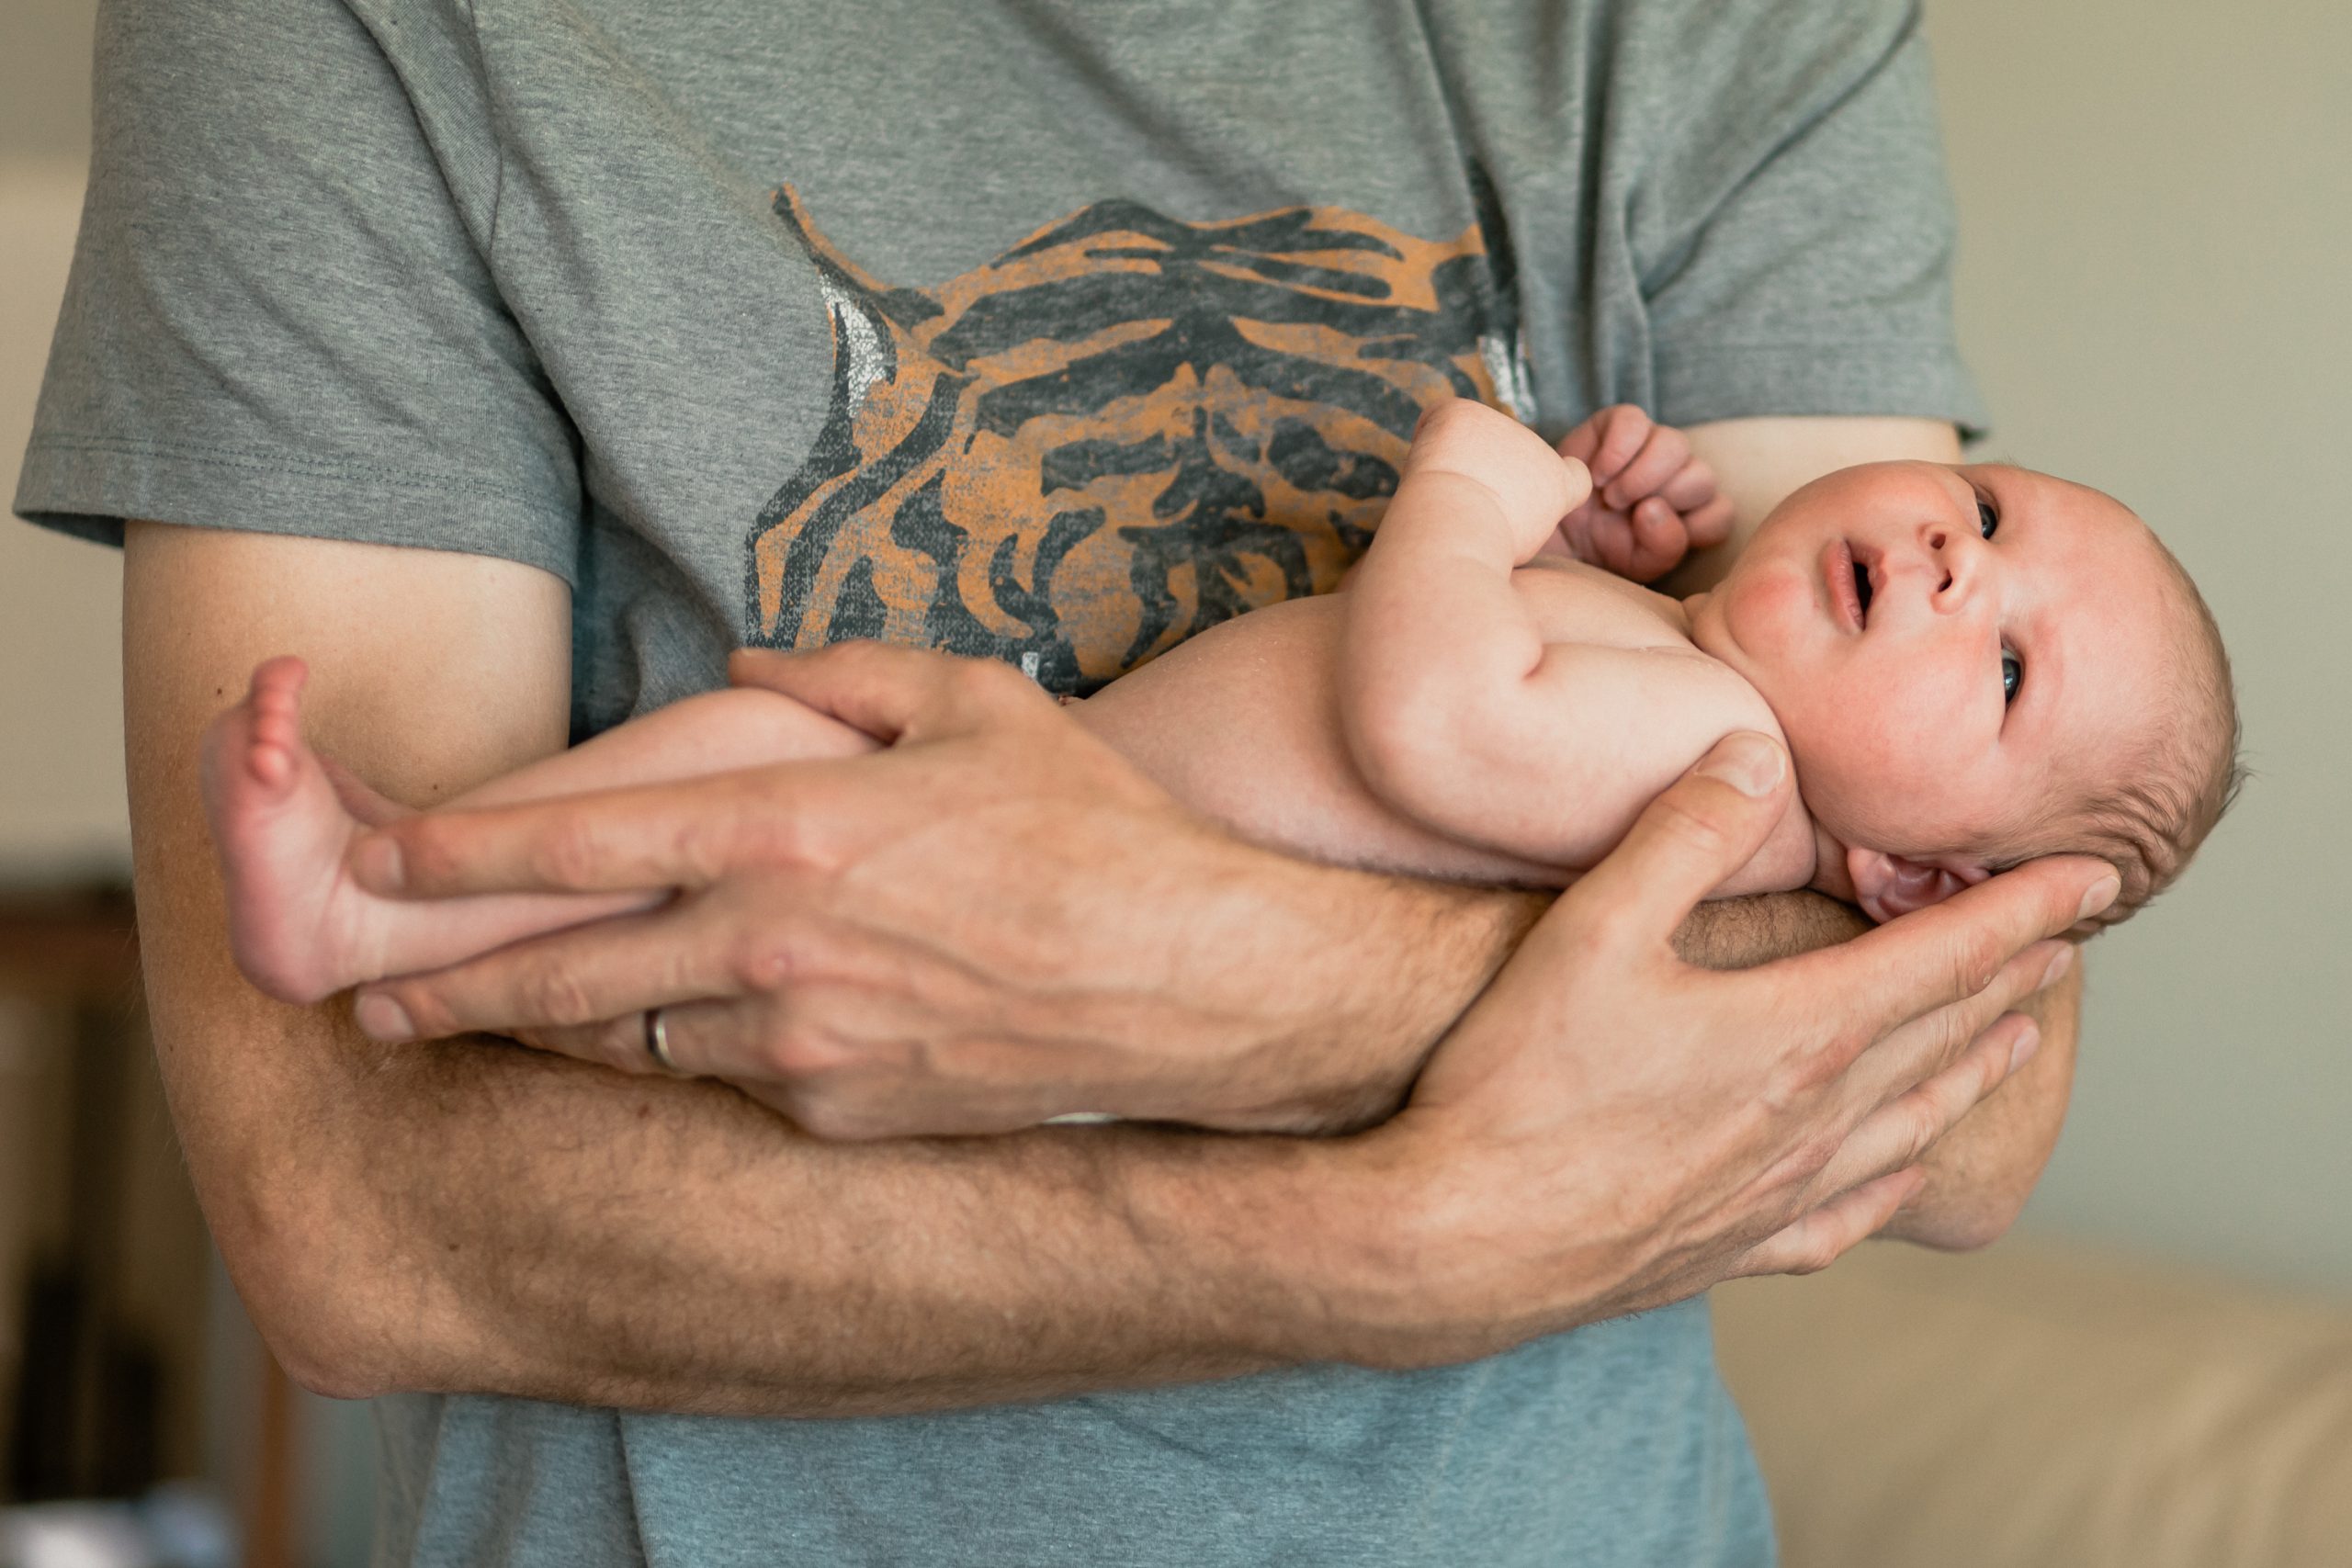 image from blog post on when to schedule a newborn photography session. photo shows a dad's arms holding his long newborn baby.